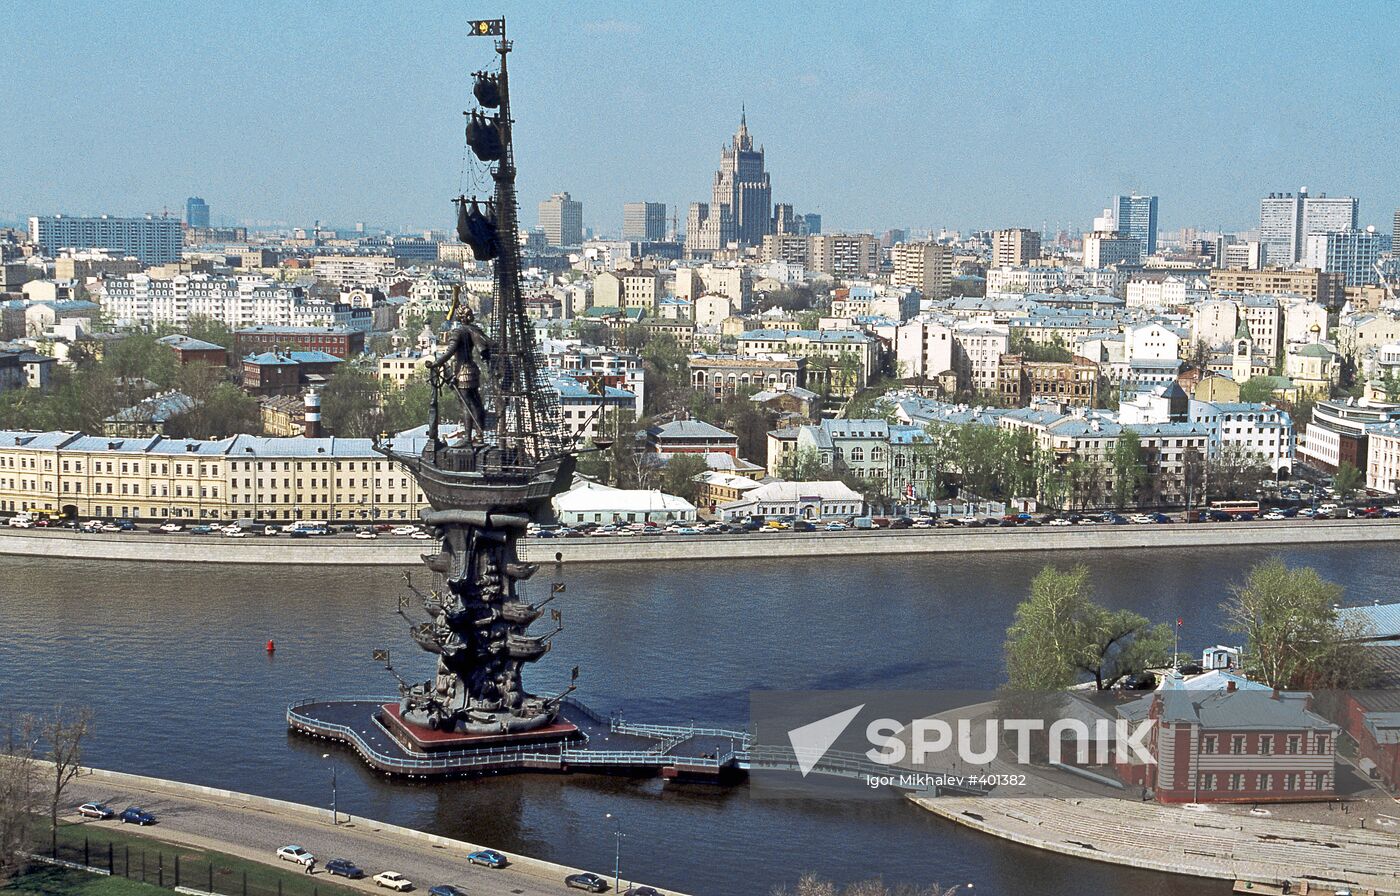 Monument to Peter the Great in Moscow